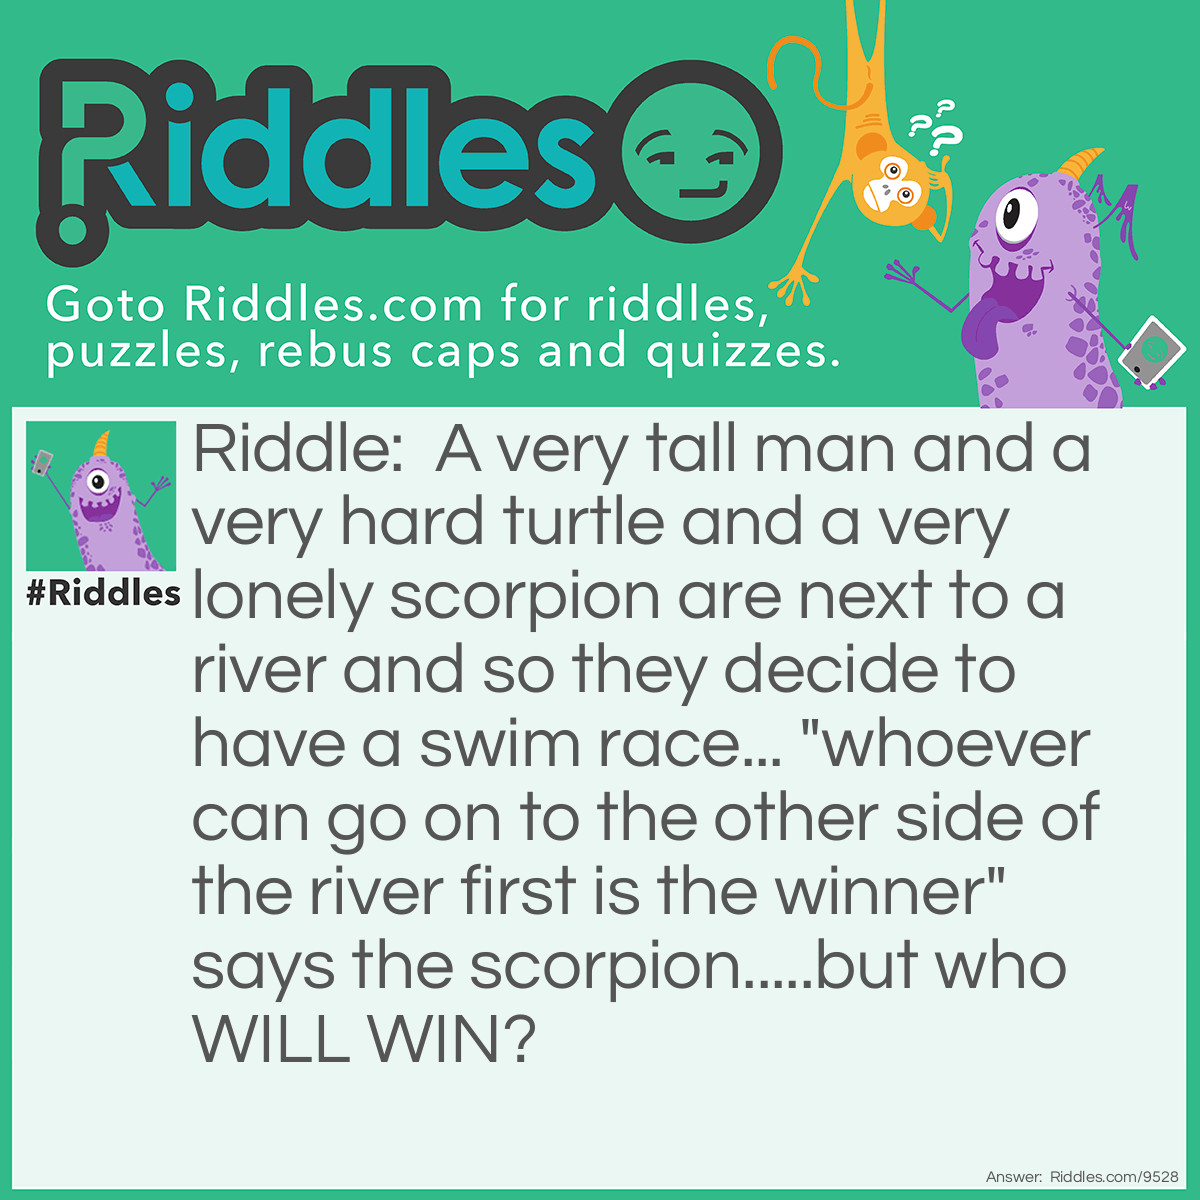 Riddle: A very tall man and a very hard turtle and a very lonely scorpion are next to a river and so they decide to have a swim race... "whoever can go on to the other side of the river first is the winner" says the scorpion.....but who WILL WIN? Answer: The lonely scorpion will win because actually the very tall man is really just a tree and the very hard turtle is actually a rock (the clue is that the scropion was very lonely so it thought the rock and the tree were it's friends)